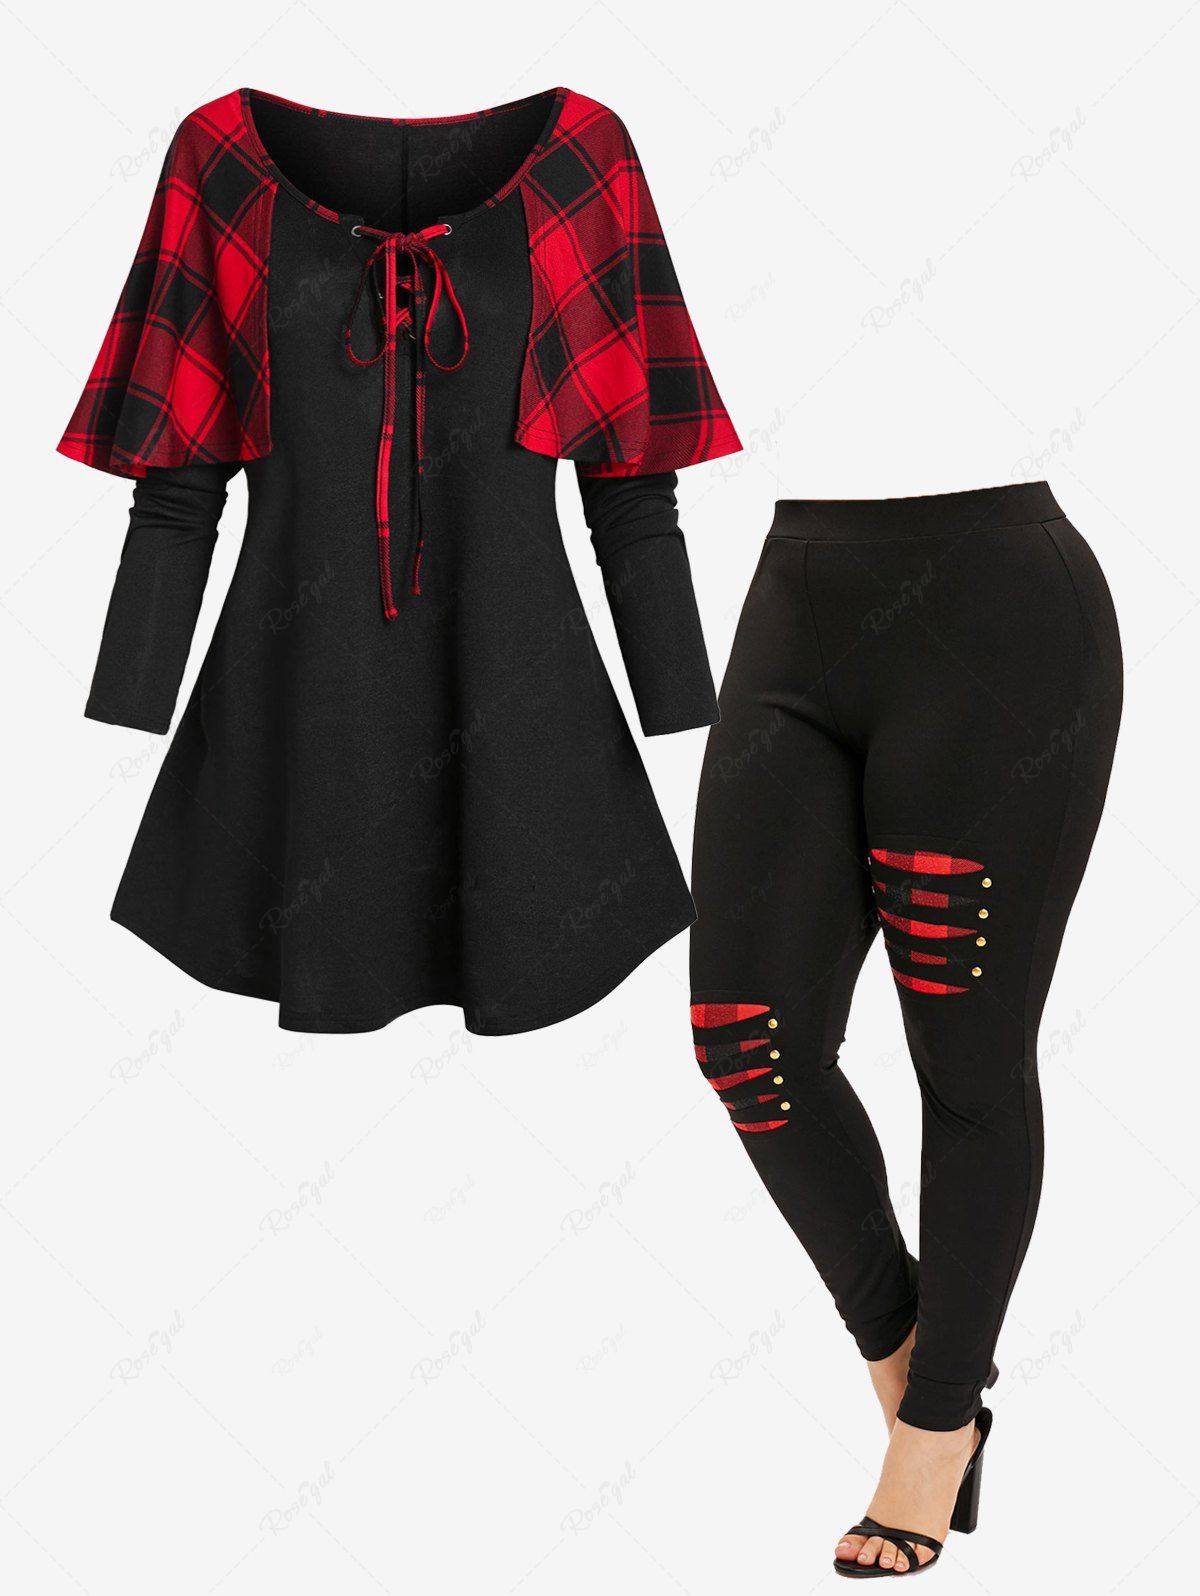 Trendy Plaid Keyhole Tie Cape Curved Tunic Top and Ripper Leggings Plus Size Outfit  